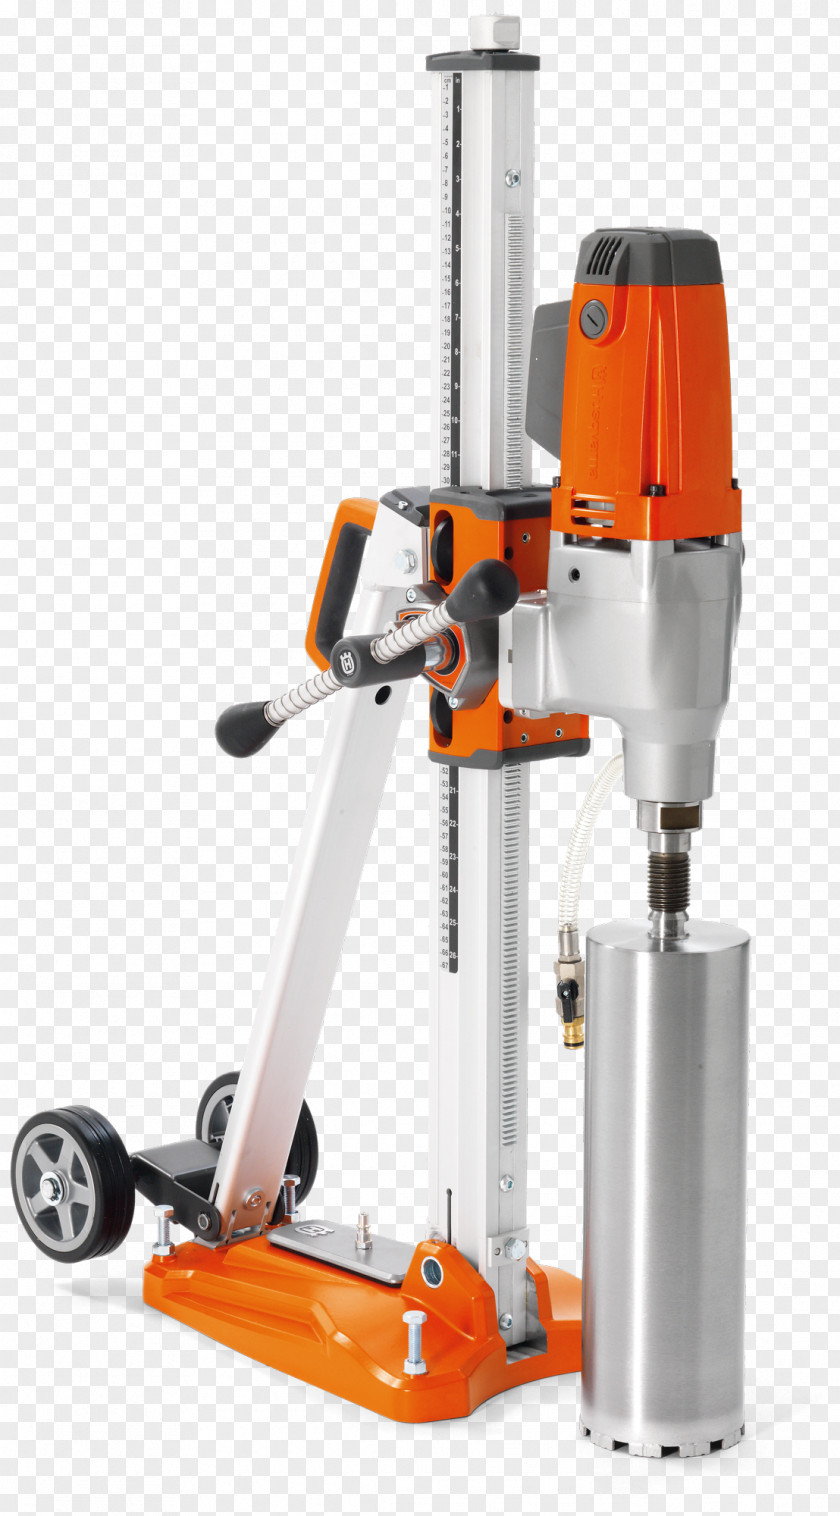 Bender Core Drill Augers Hammer Building Materials Architectural Engineering PNG